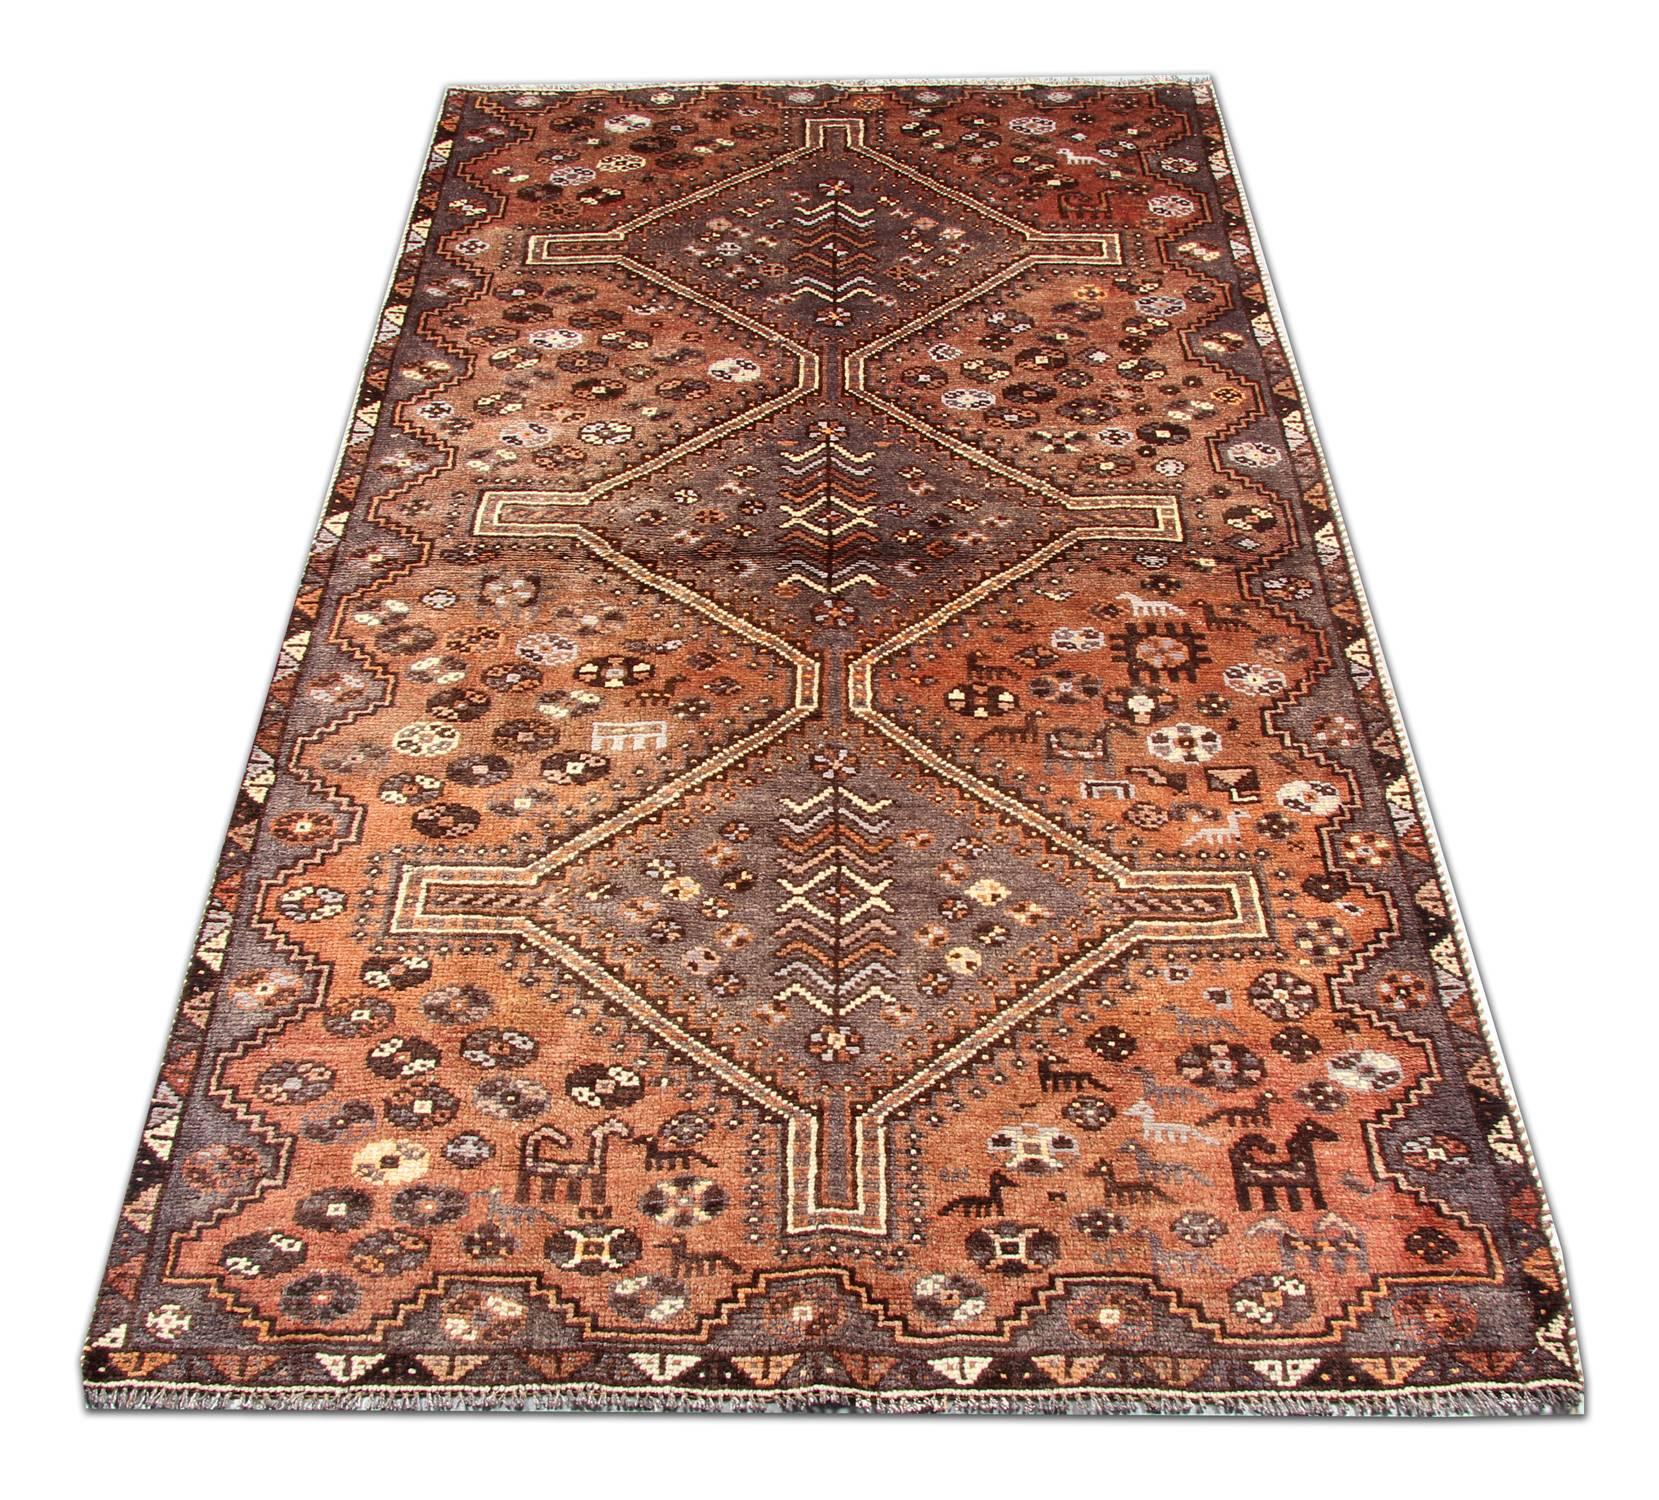 This rustic wool rug has been woven with a fantastic diamond medallion design. Three medallions decorate the centre of this piece with a surrounding design adorned with floral and animal motifs with a geometric repeat border. This rug would make a